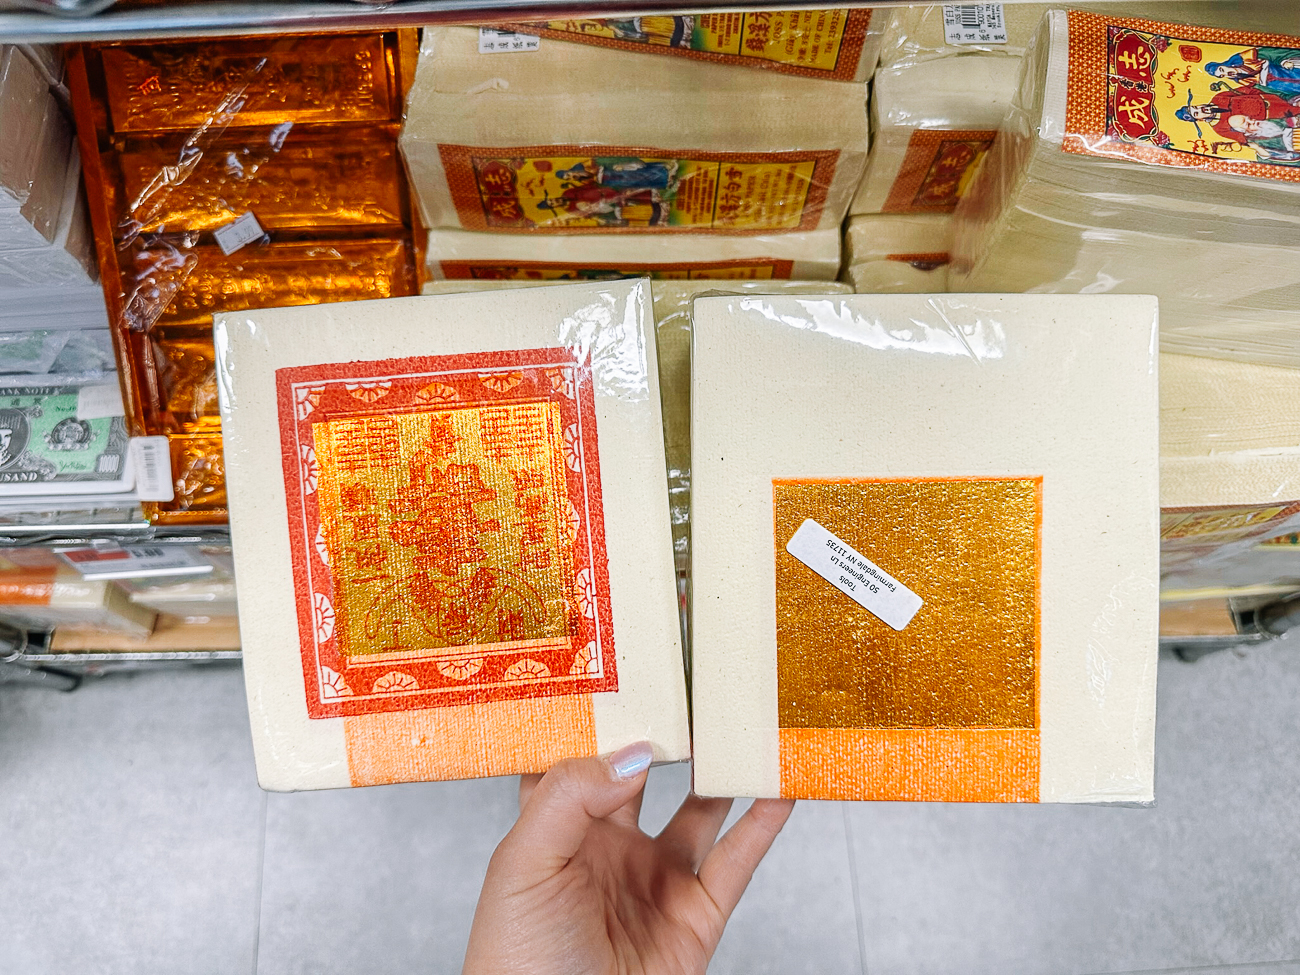 Chinese joss papers for making gold bars to burn